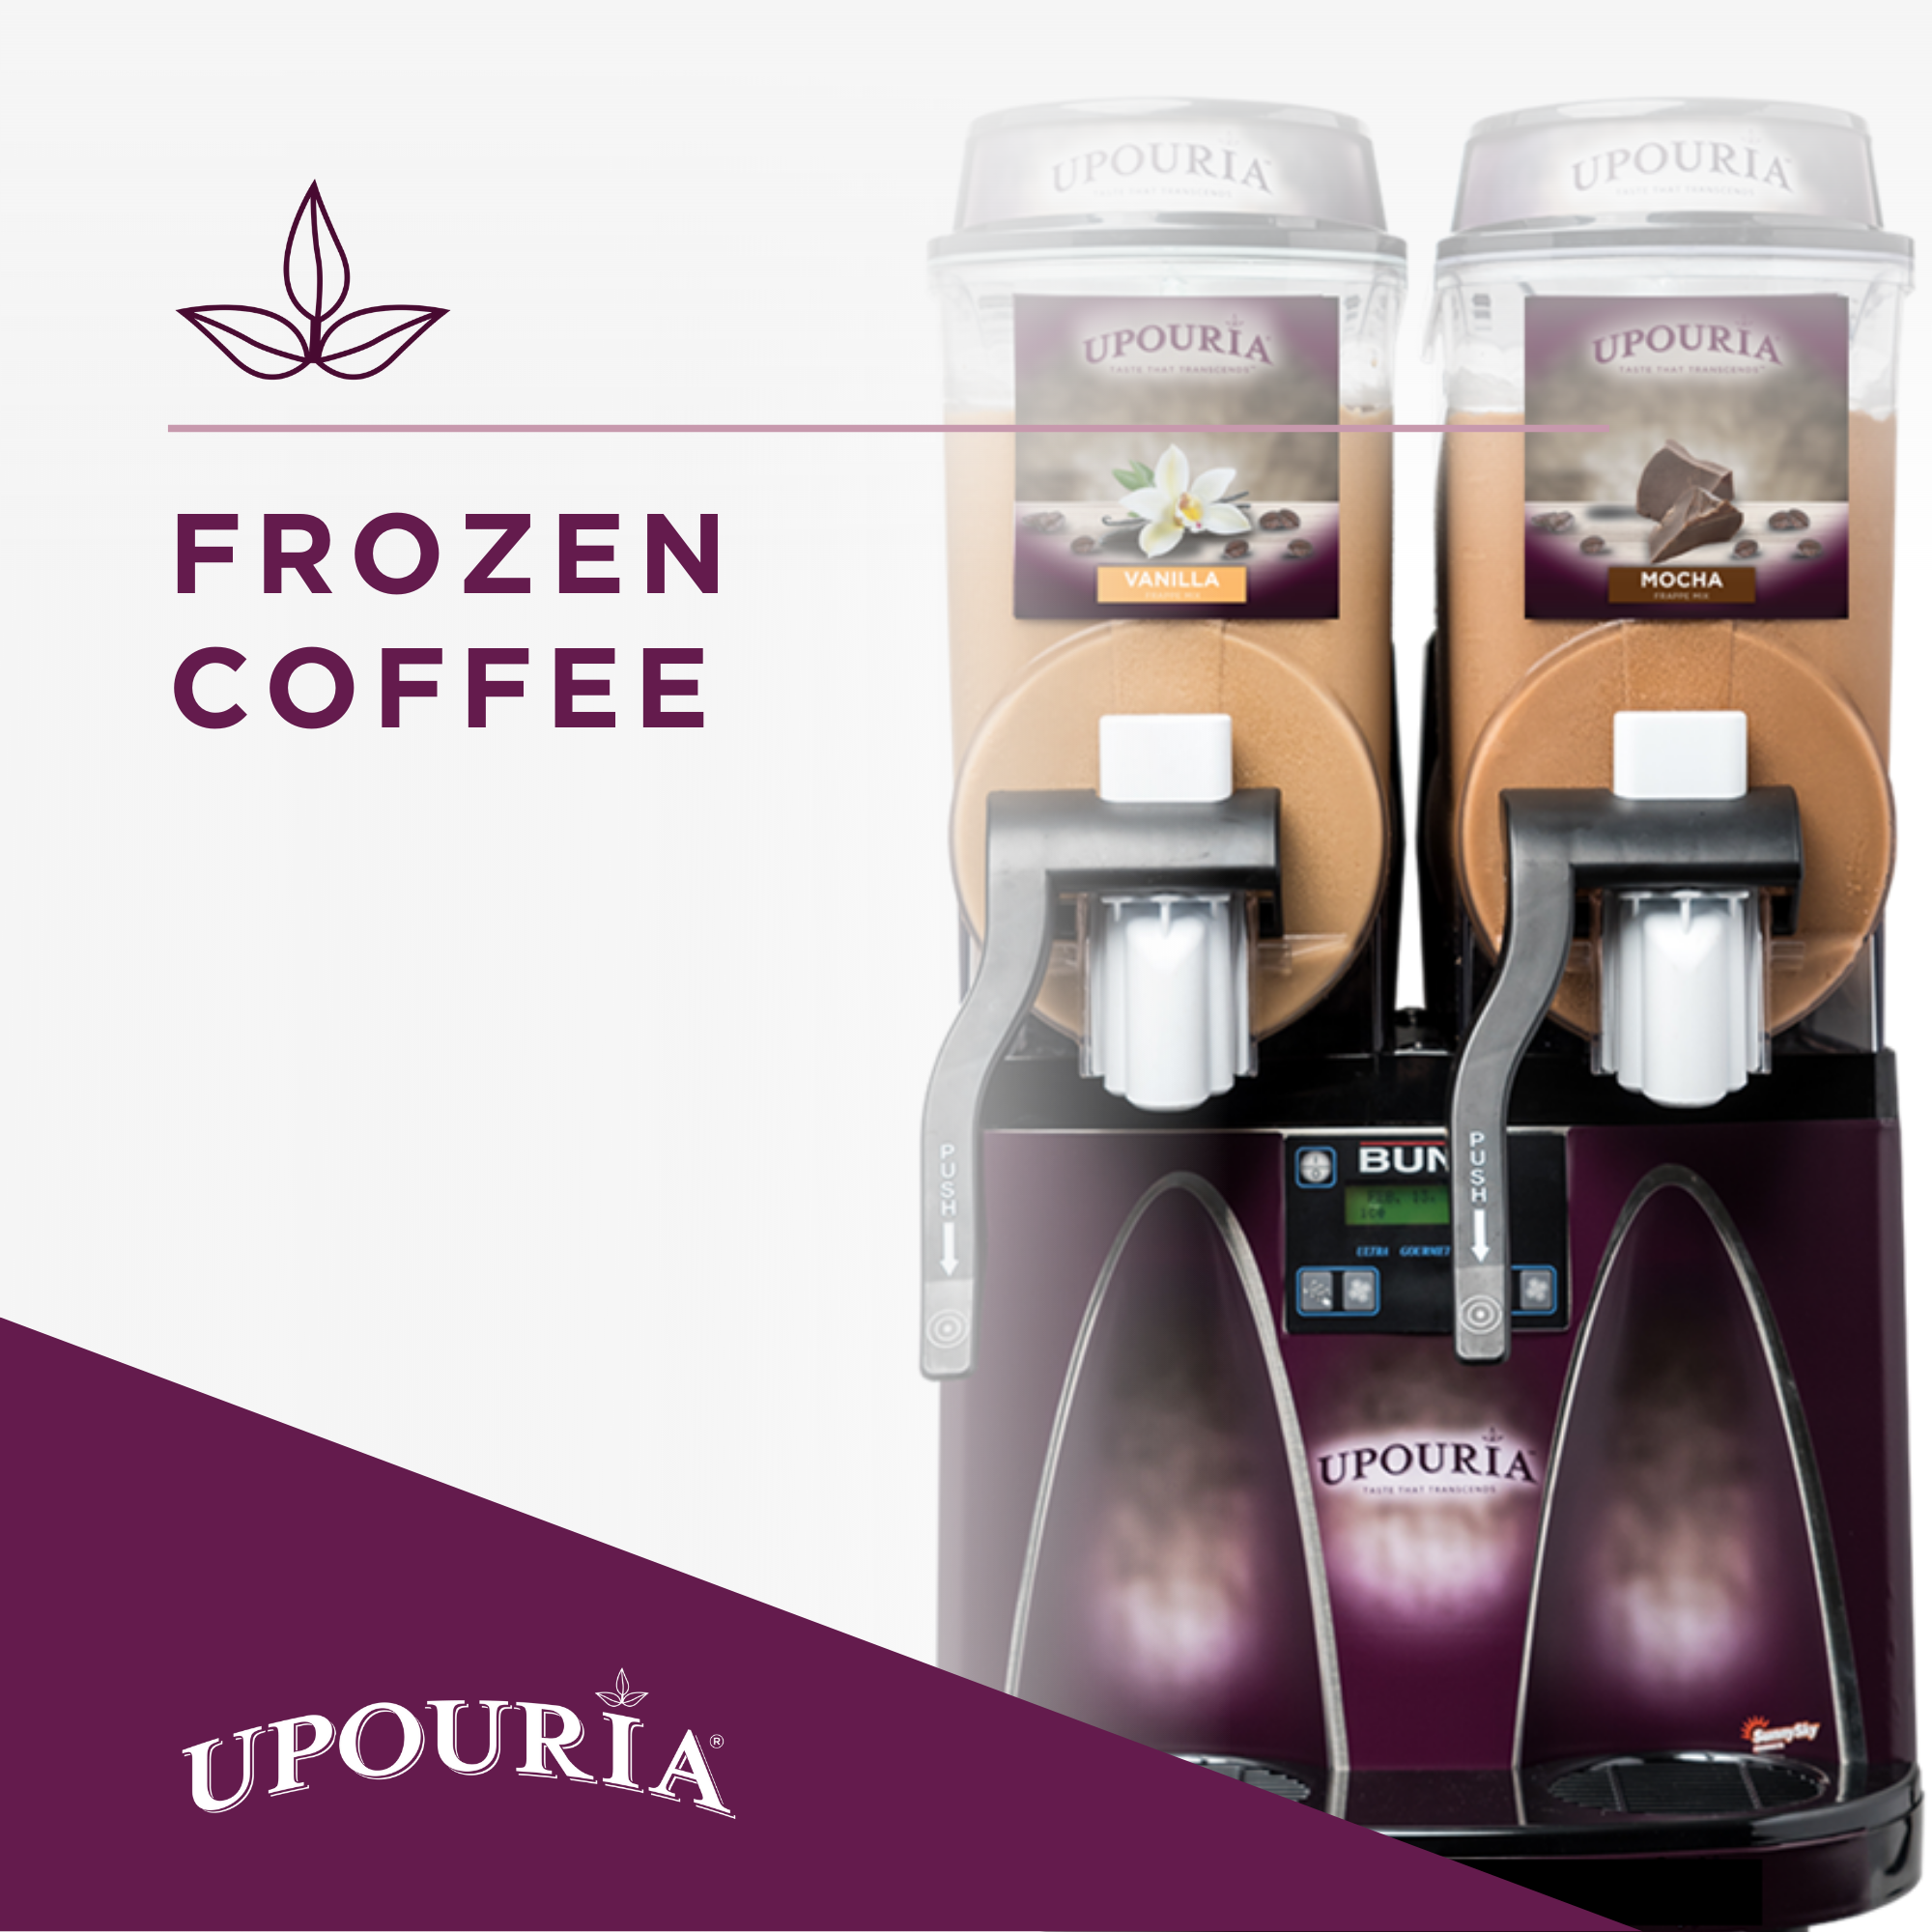 Upouria Cold Brew Frozen Coffee Featured Image 2022